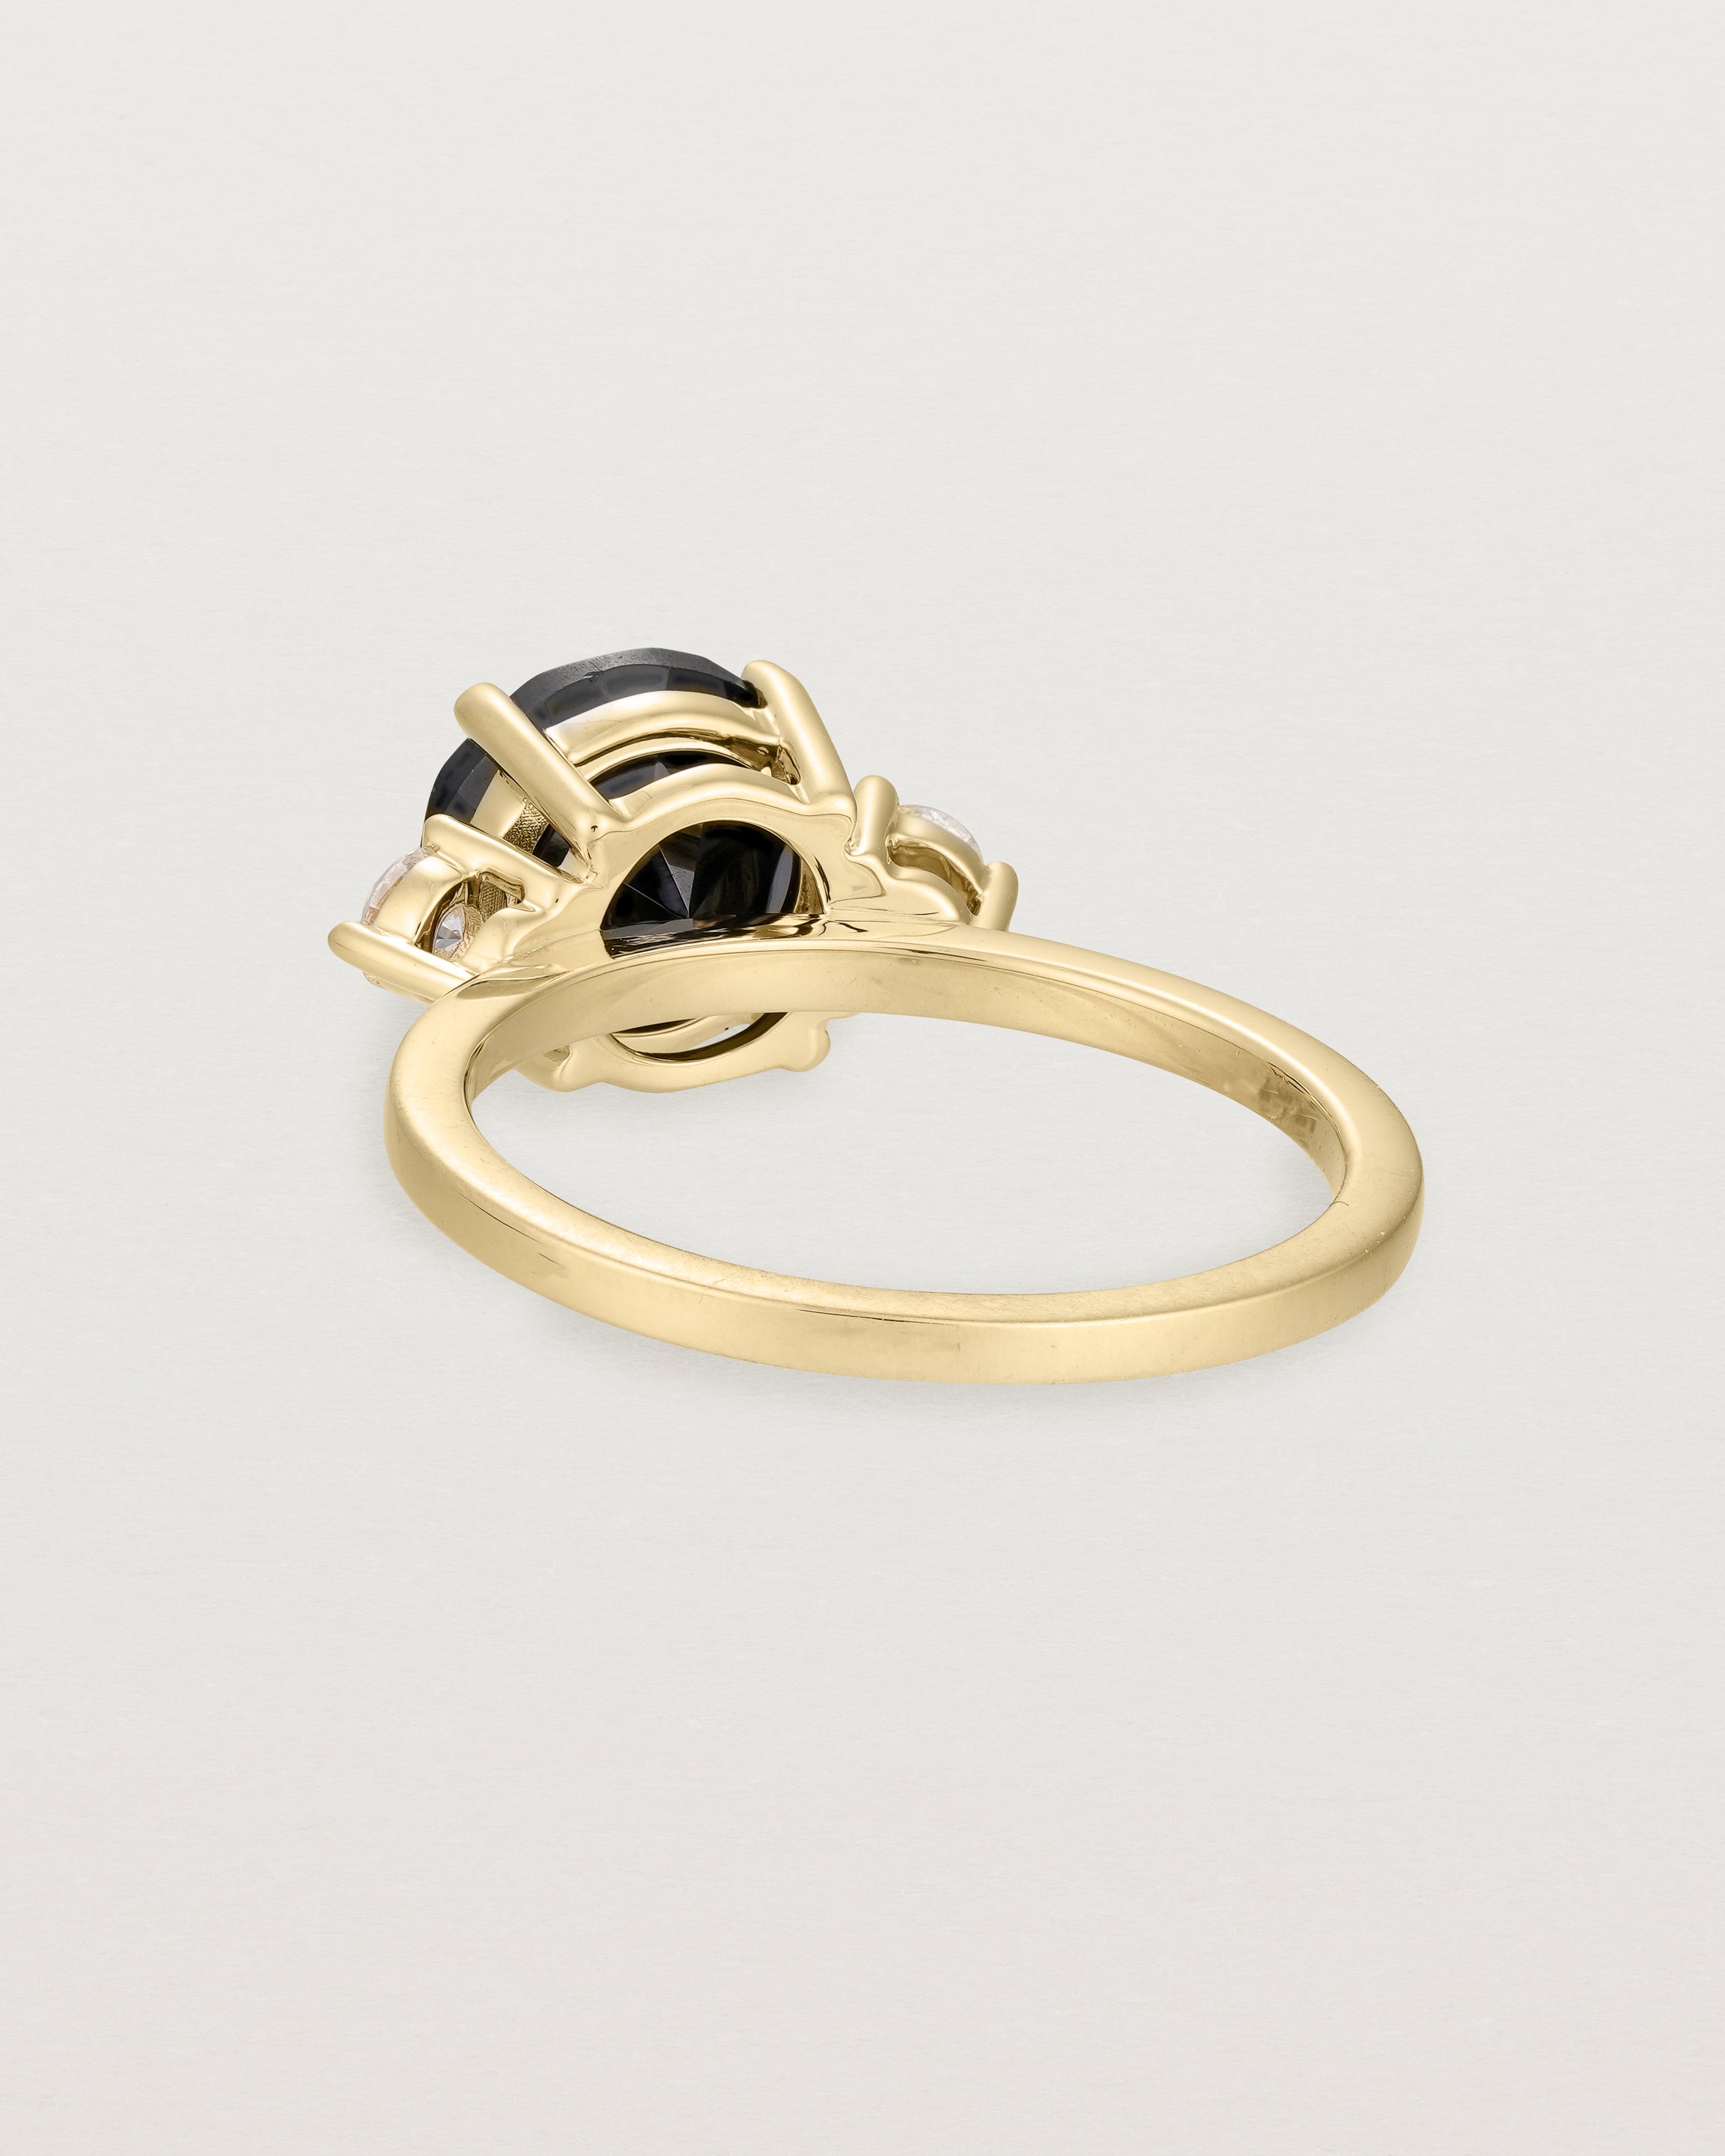 Back view of the Una Round Trio Ring | Black Spinel & Diamonds | Yellow Gold.